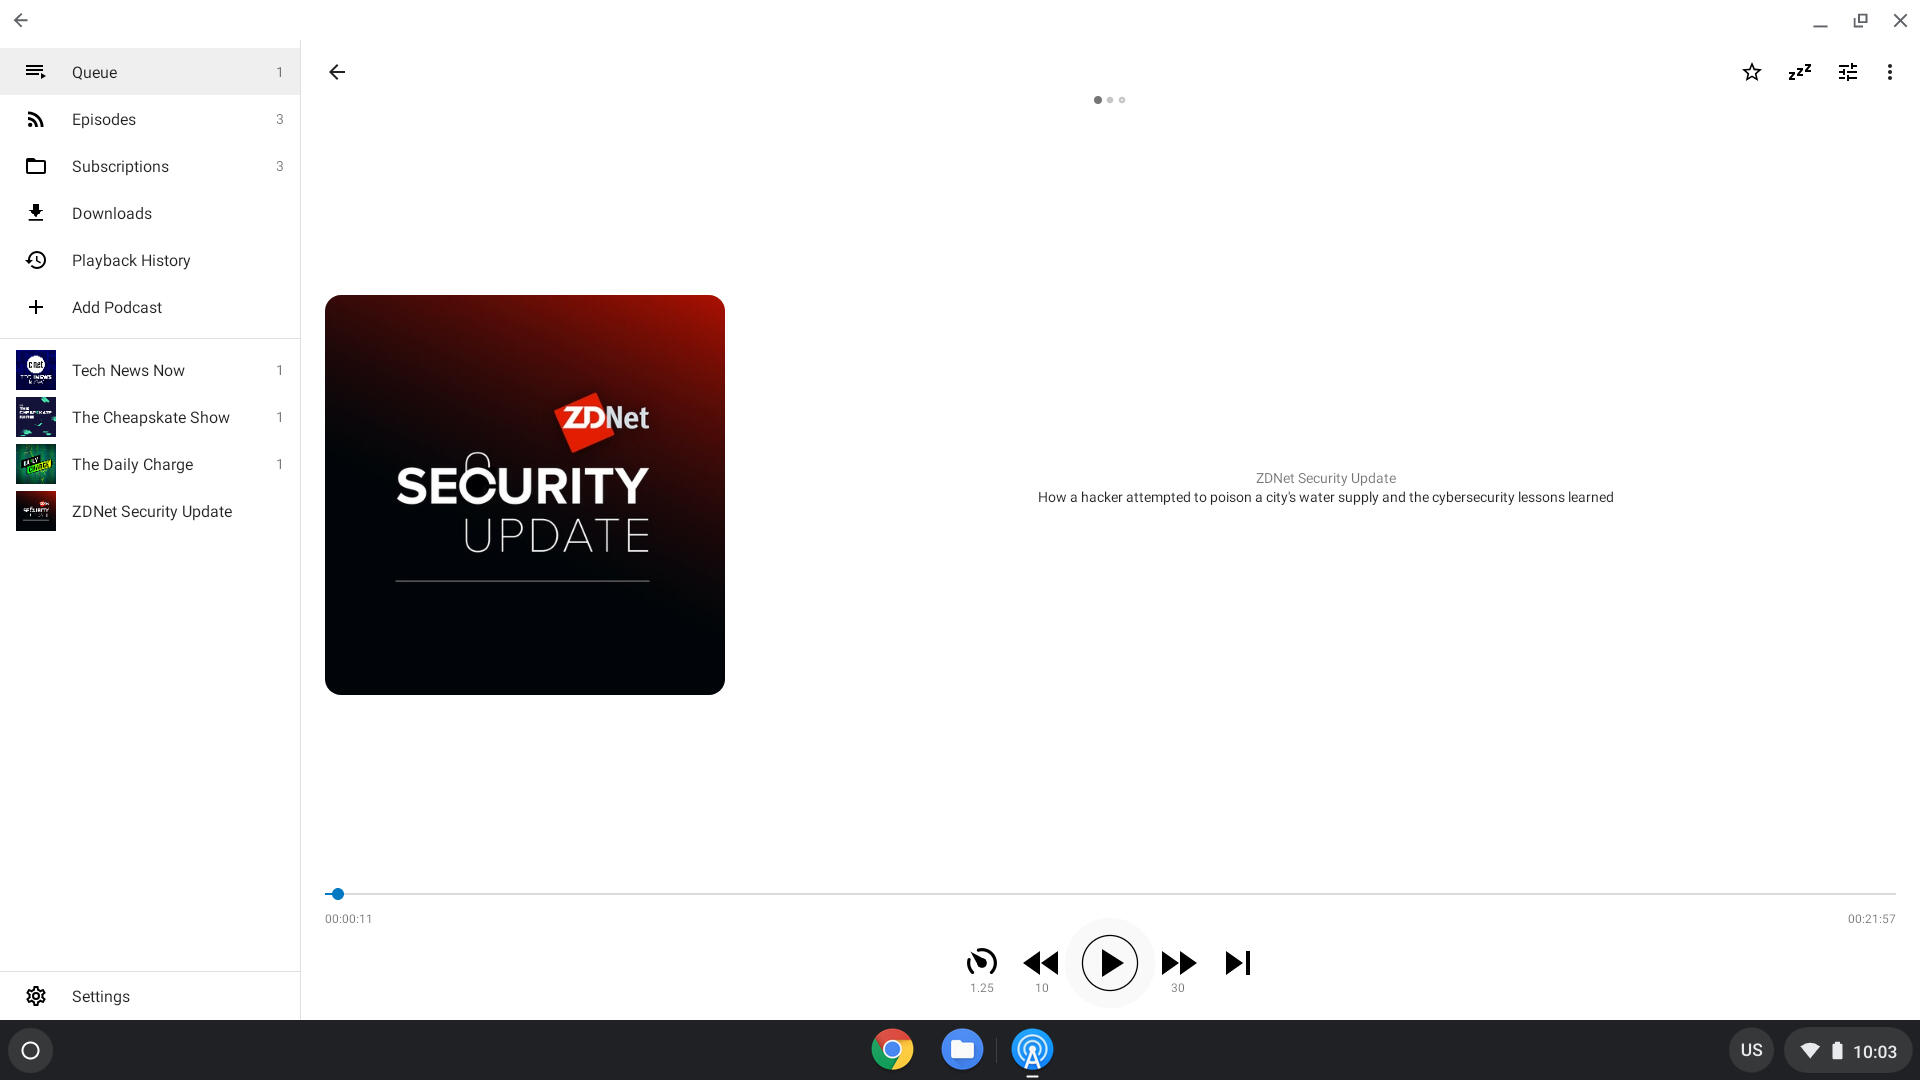 Screenshot of AntennaPod Android app on a Chromebook, with ZDNet Security Update podcast shown.